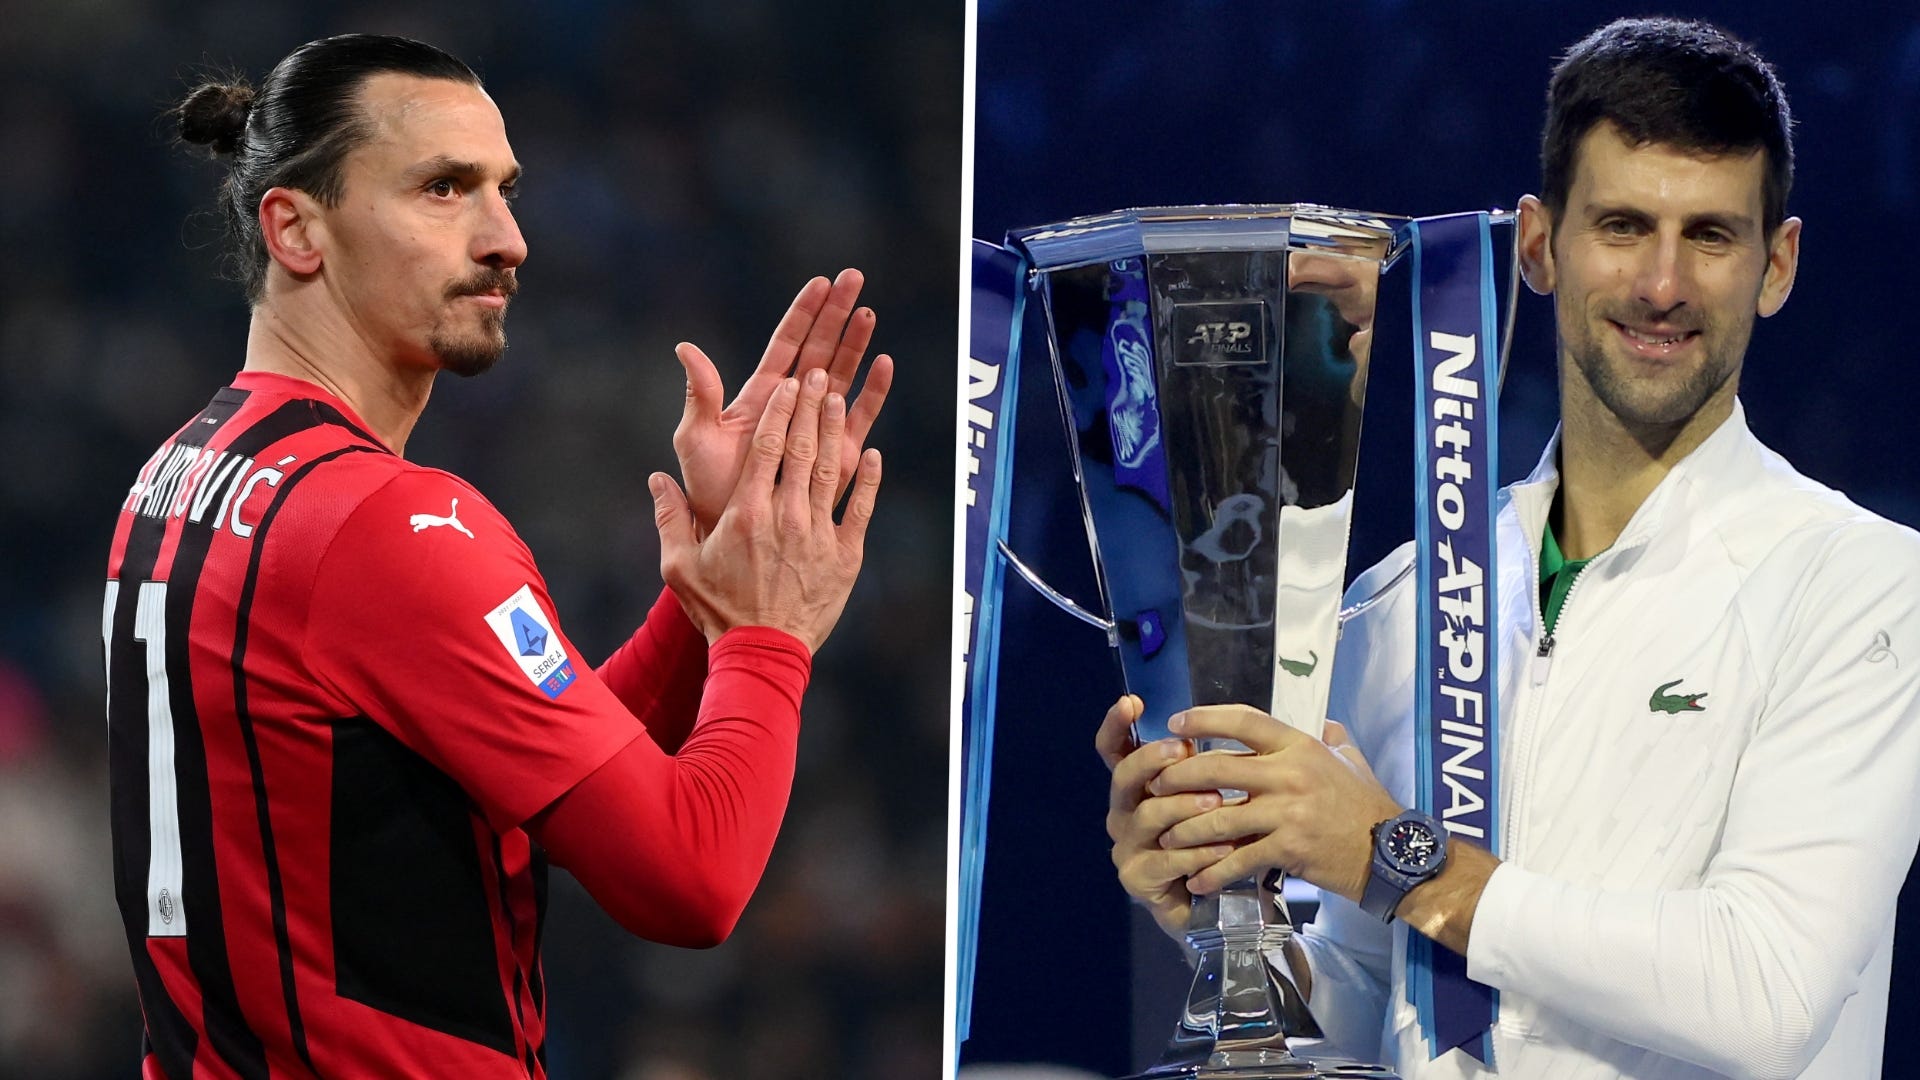 WATCH Champion vibes only! World Cup absentee Ibrahimovic meets Djokovic after tennis stars ATP Finals triumph Goal US